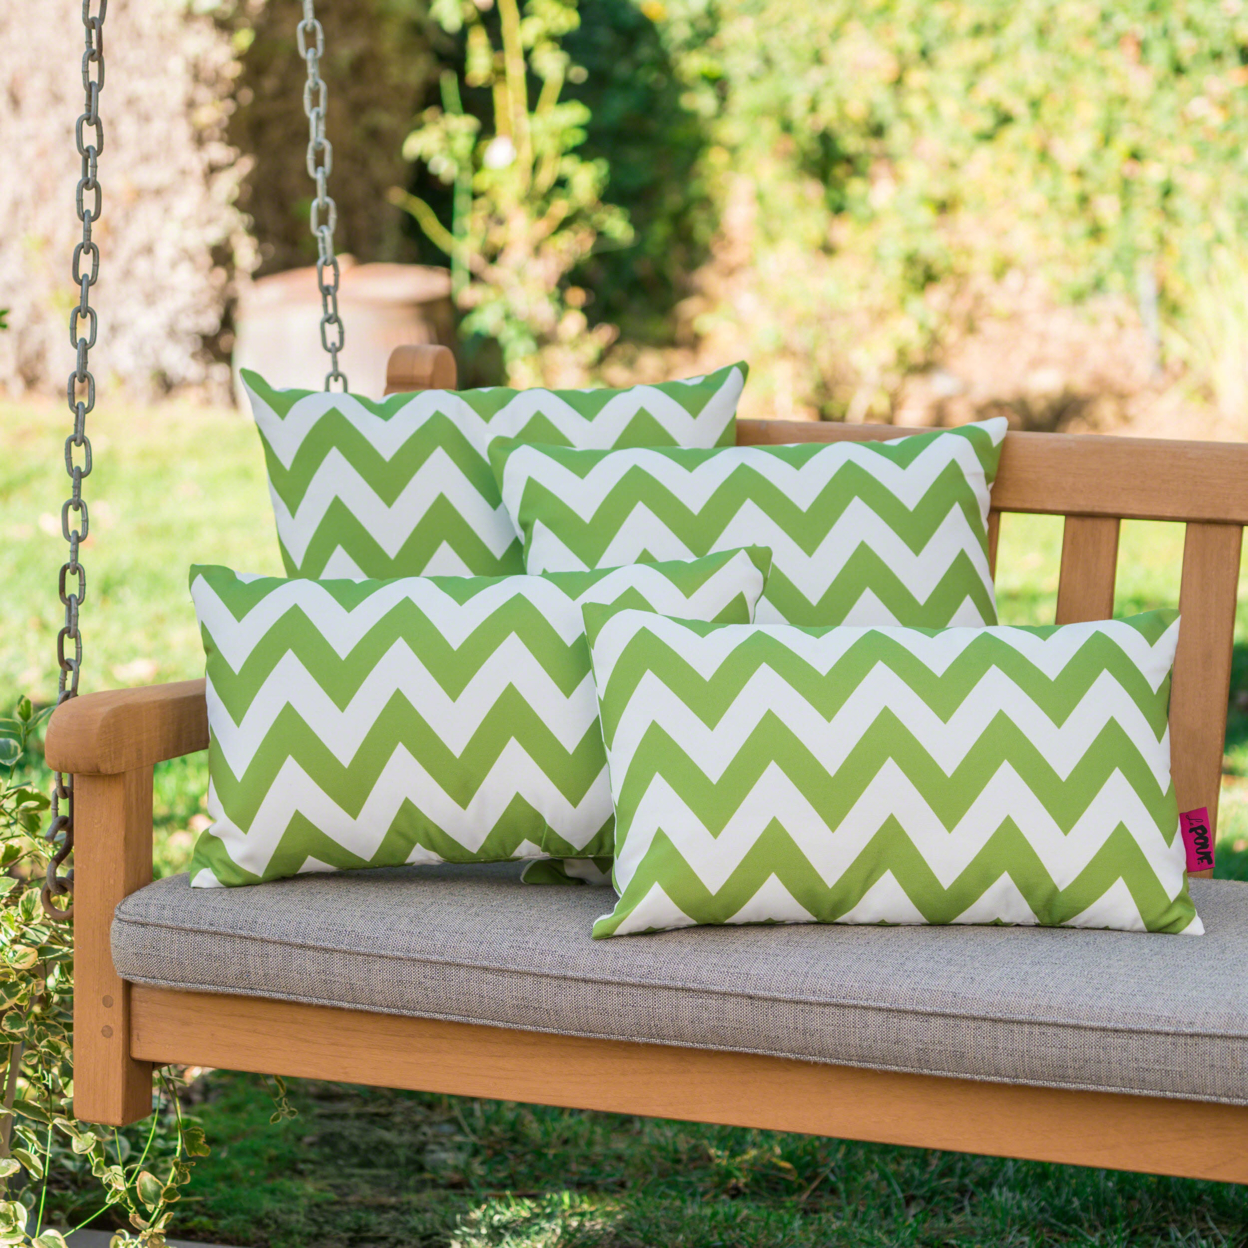 Embry Outdoor Water Resistant Square And Rectangular Pillows - Set Of 4 - Green/White